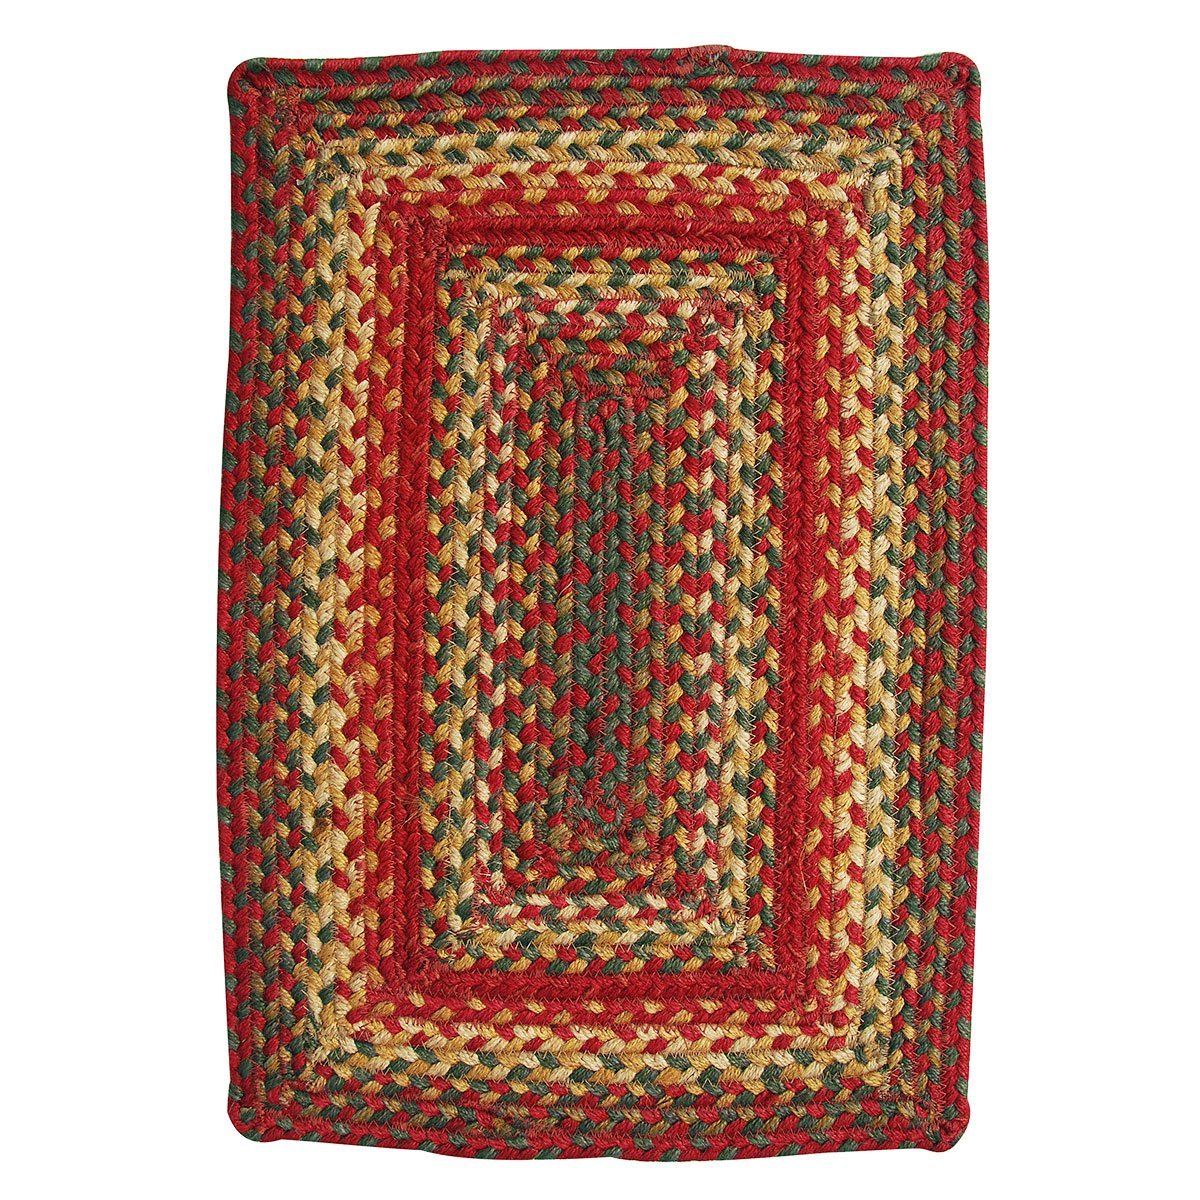 595126 Cider Barn Hudson Jute Braided Rugs - Placemats - Rectangle